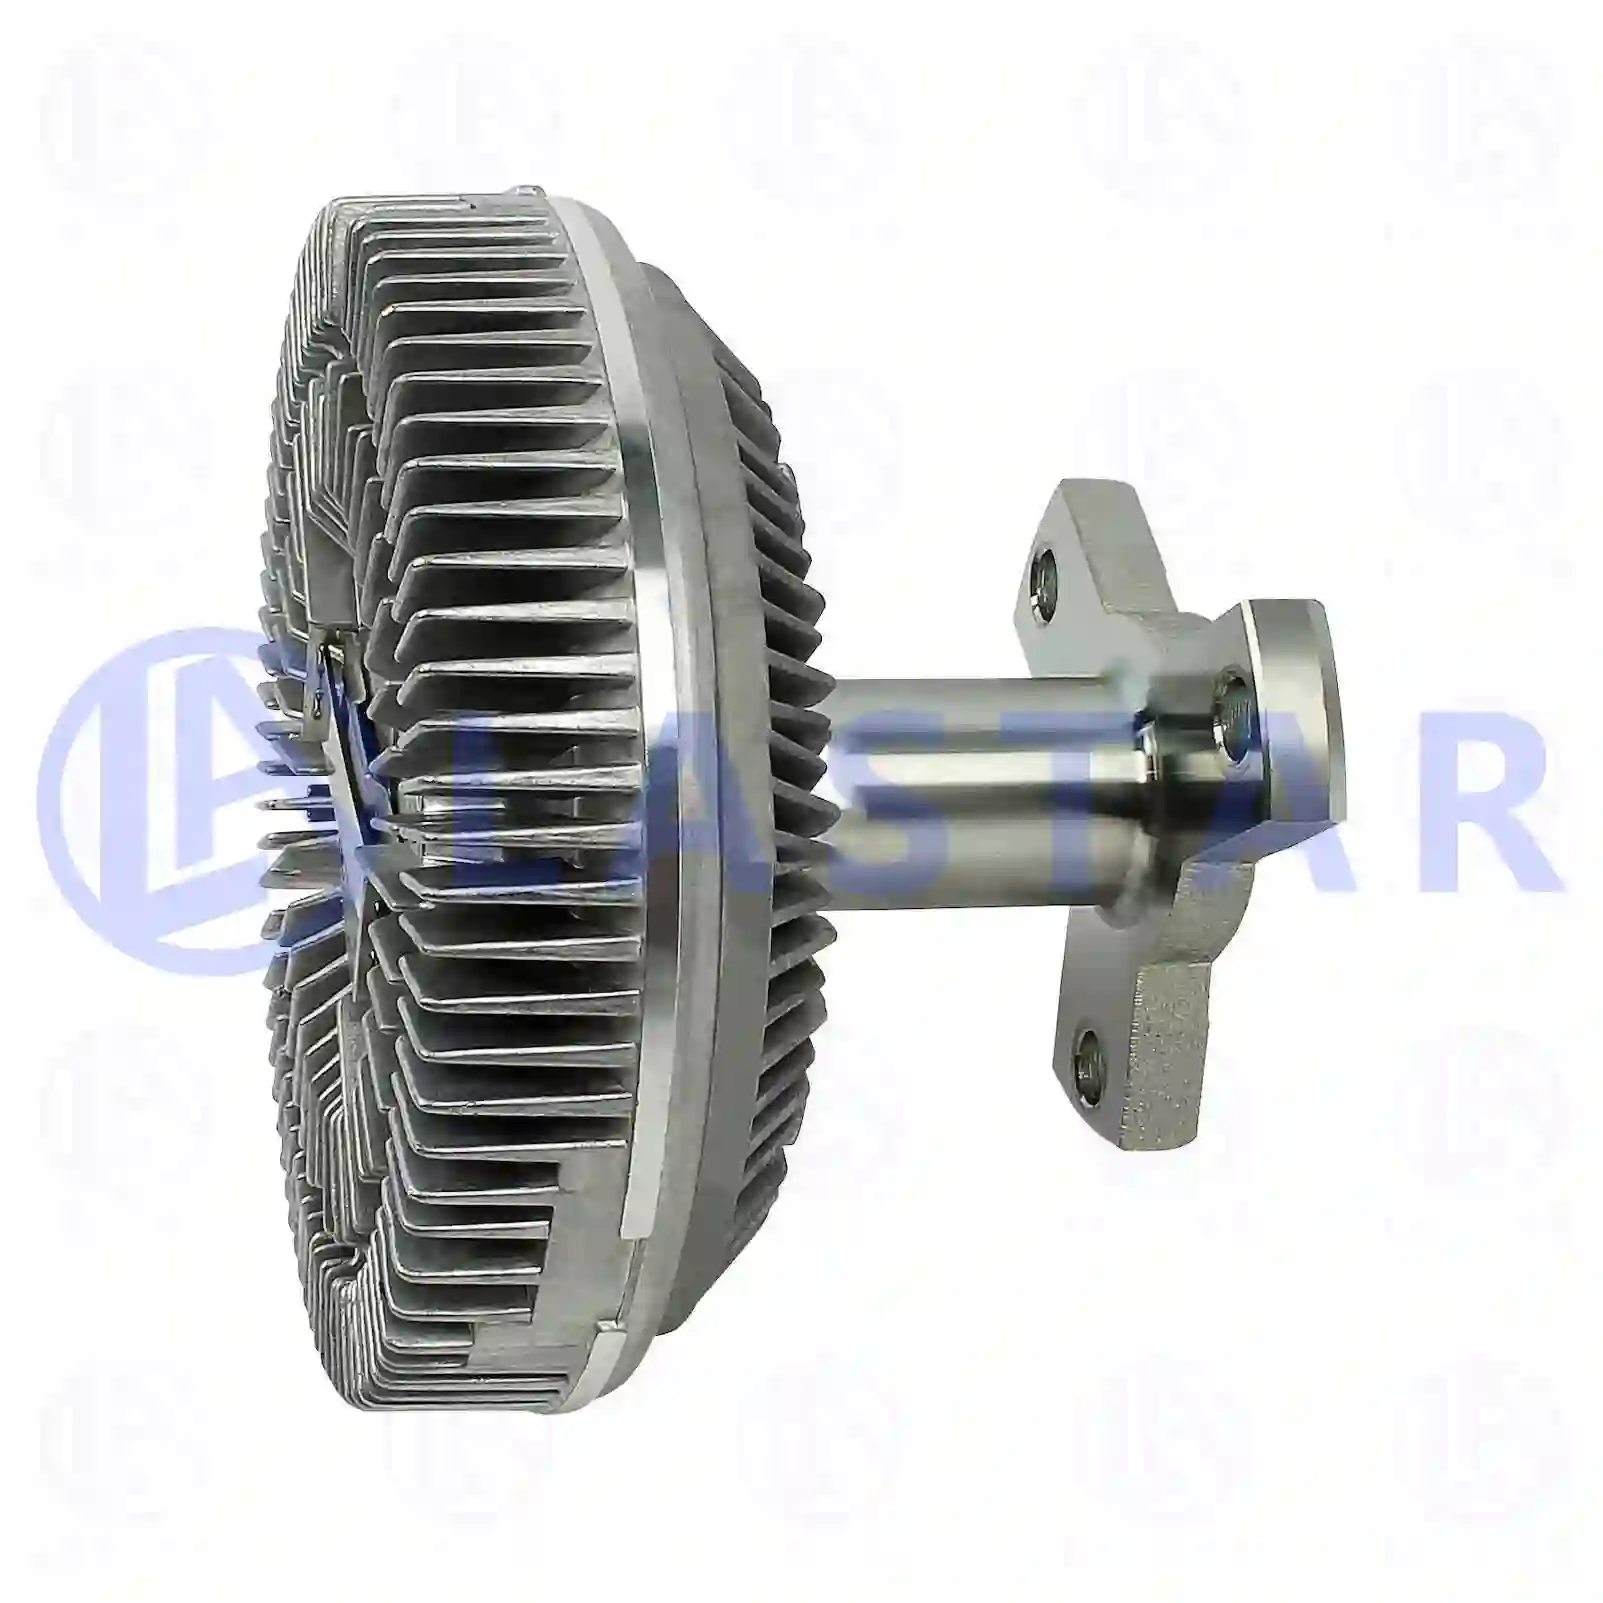 Fan clutch, 77709259, 500395009, , , , , , ||  77709259 Lastar Spare Part | Truck Spare Parts, Auotomotive Spare Parts Fan clutch, 77709259, 500395009, , , , , , ||  77709259 Lastar Spare Part | Truck Spare Parts, Auotomotive Spare Parts